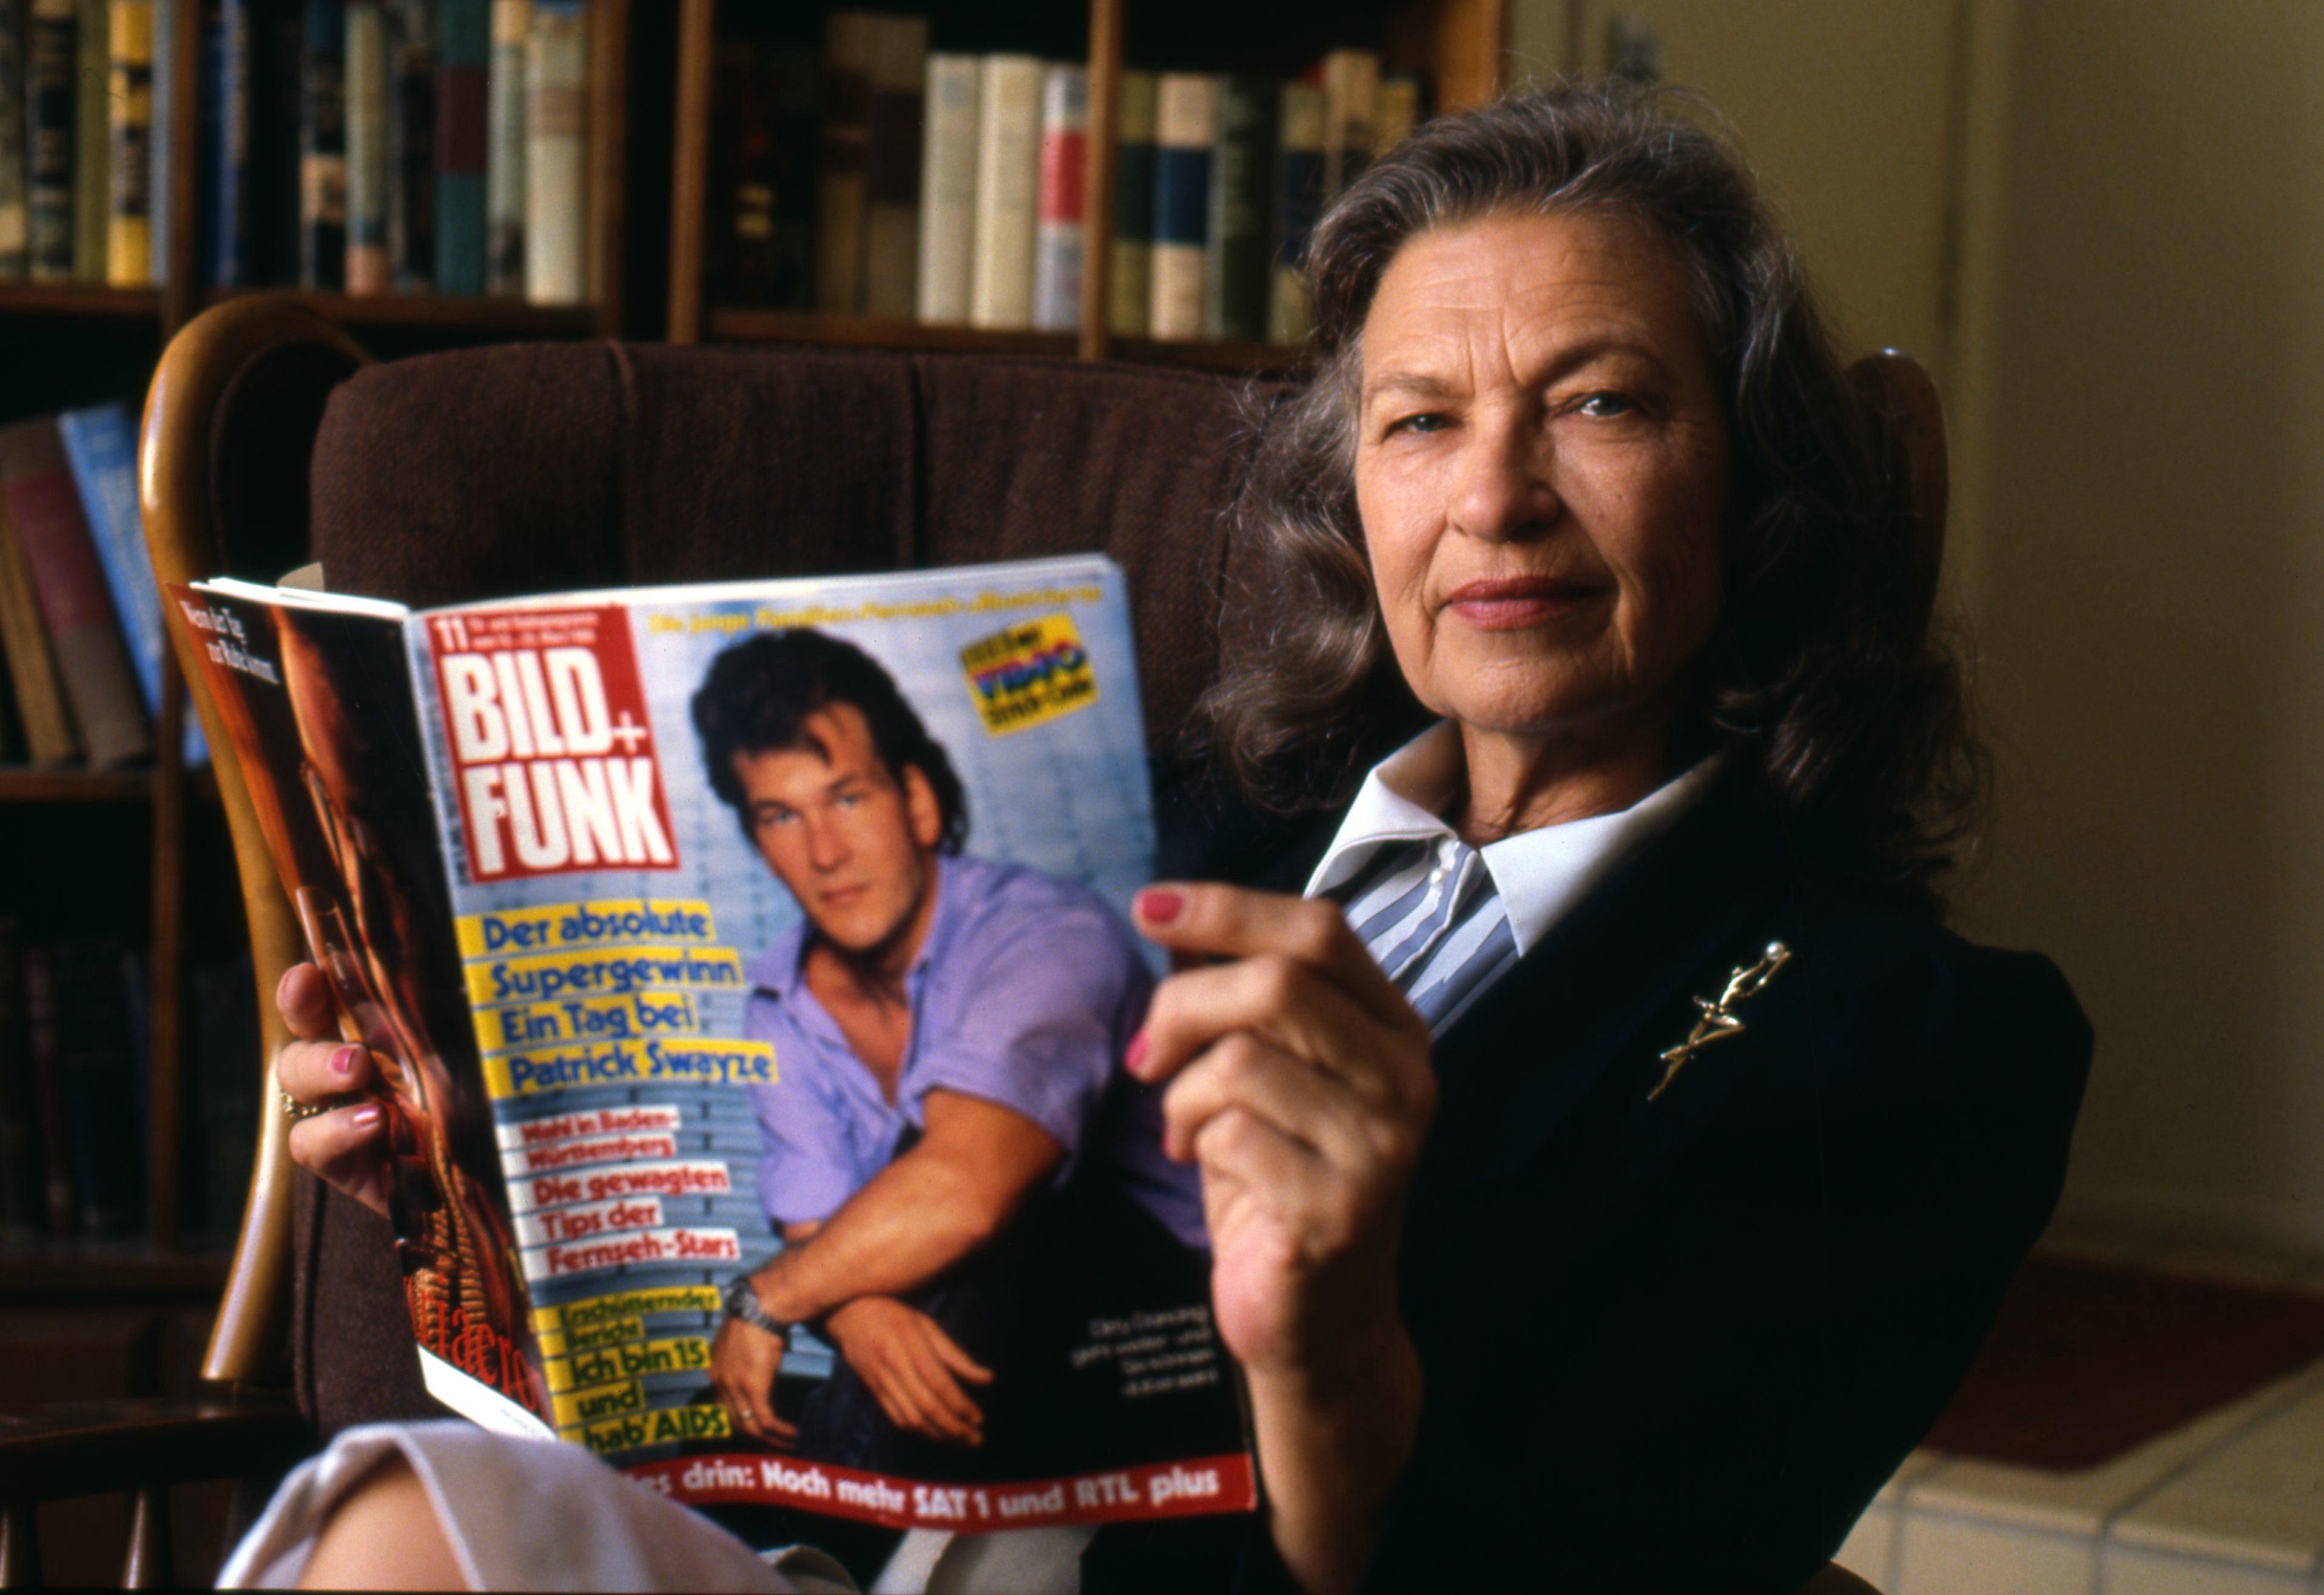 Patsy Swayze holds a copy of Bild Funk Magazine featuring her son Patrick Swayze in 1988. | Source: Getty Images